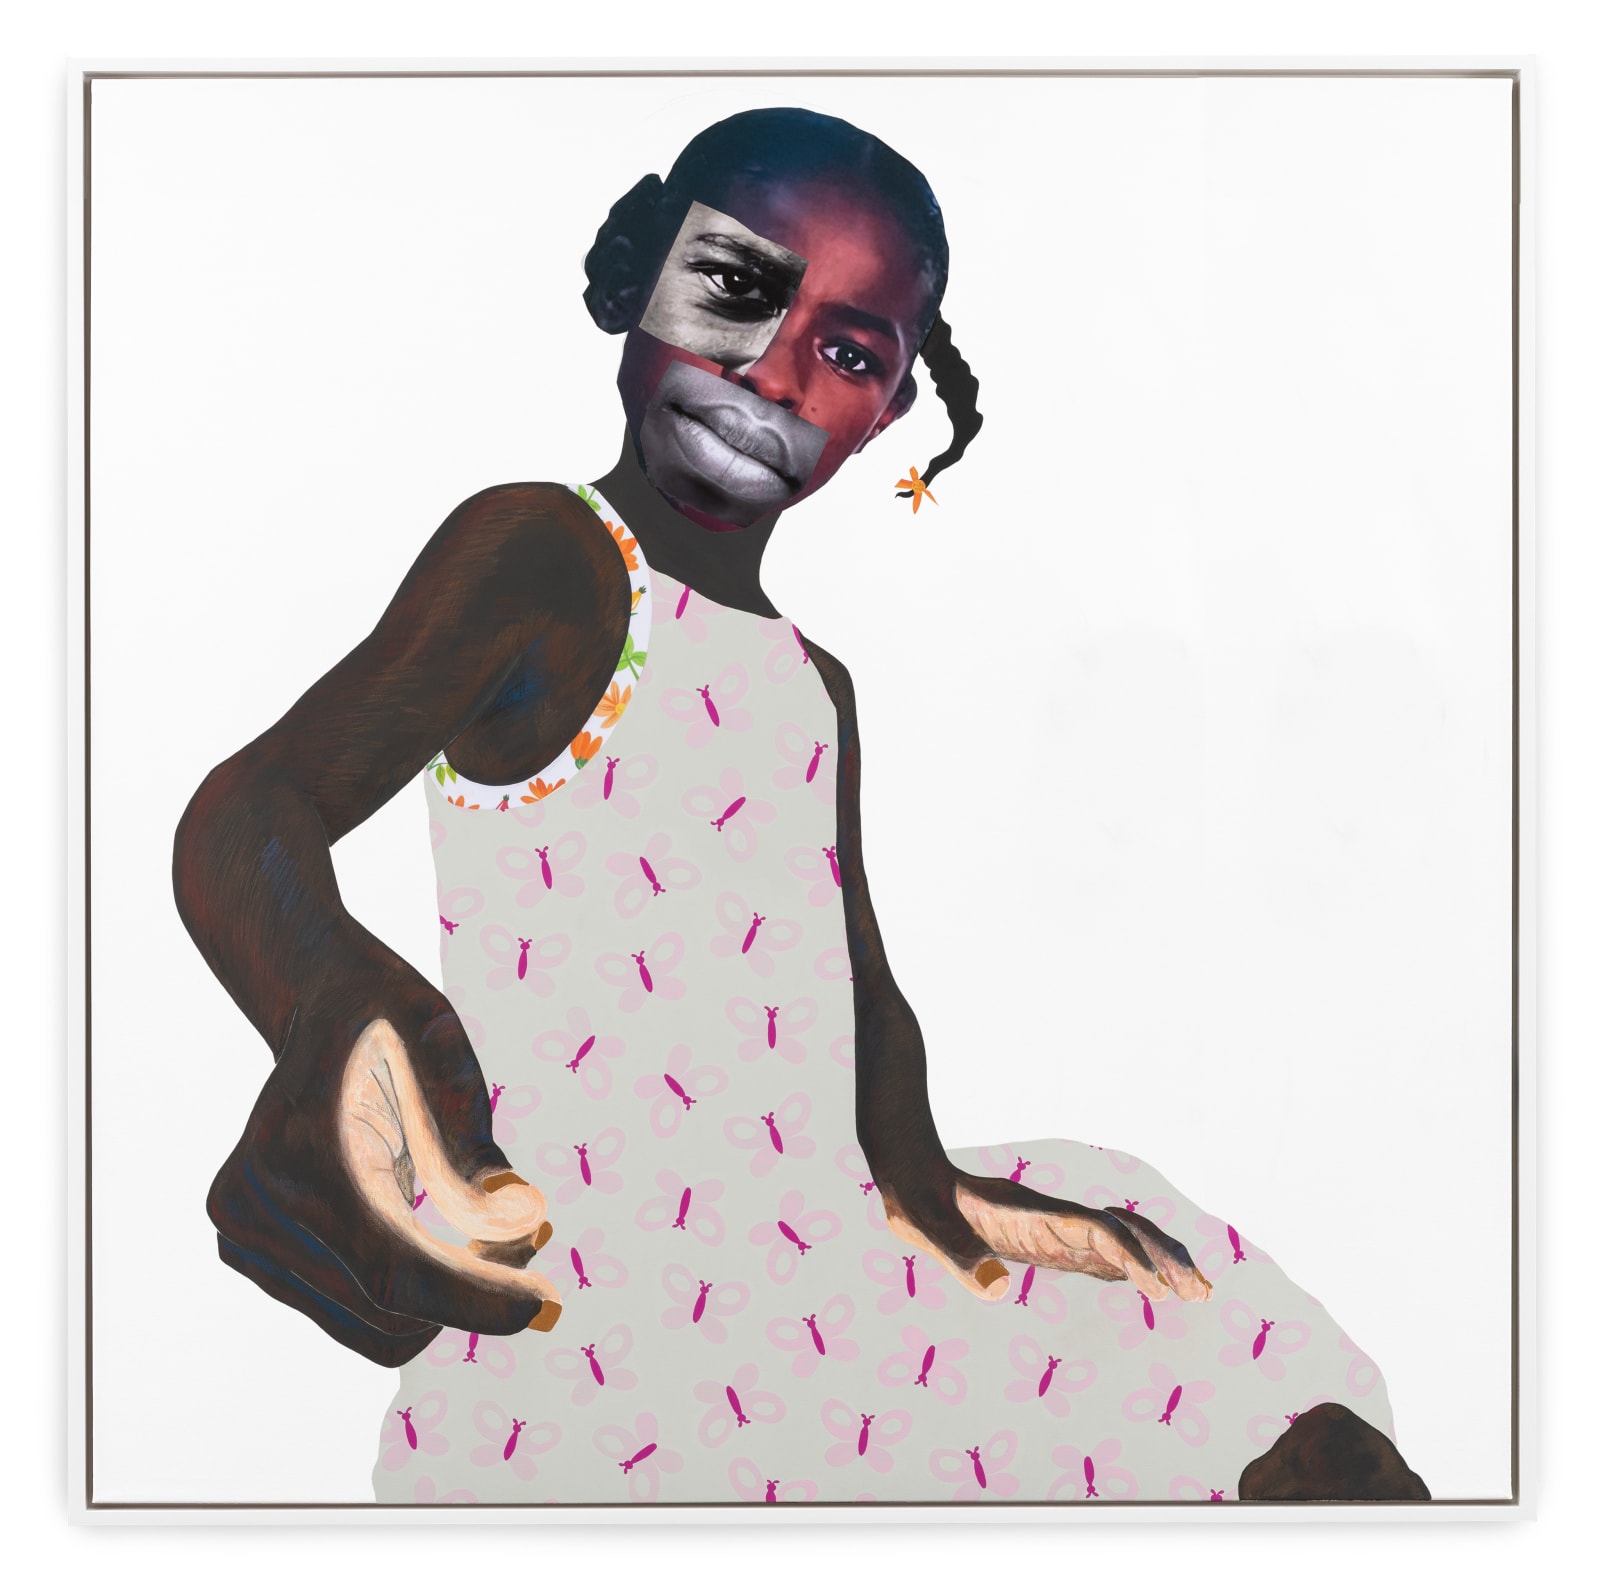 <div class="artist">Deborah Roberts</div><div class="title_and_year"><span class="title">Come and see</span><span class="year">, 2023</span></div>